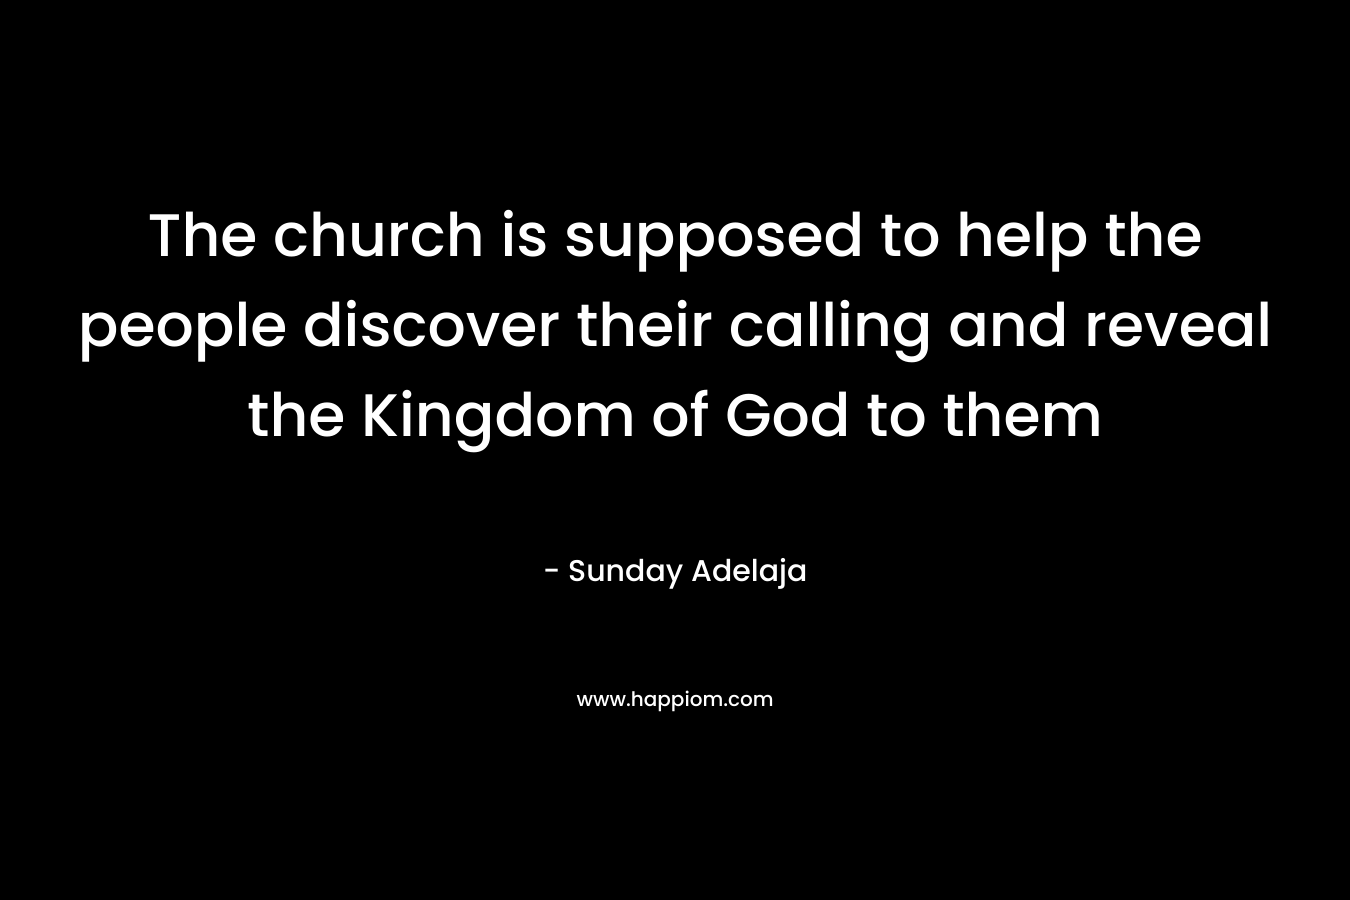 The church is supposed to help the people discover their calling and reveal the Kingdom of God to them